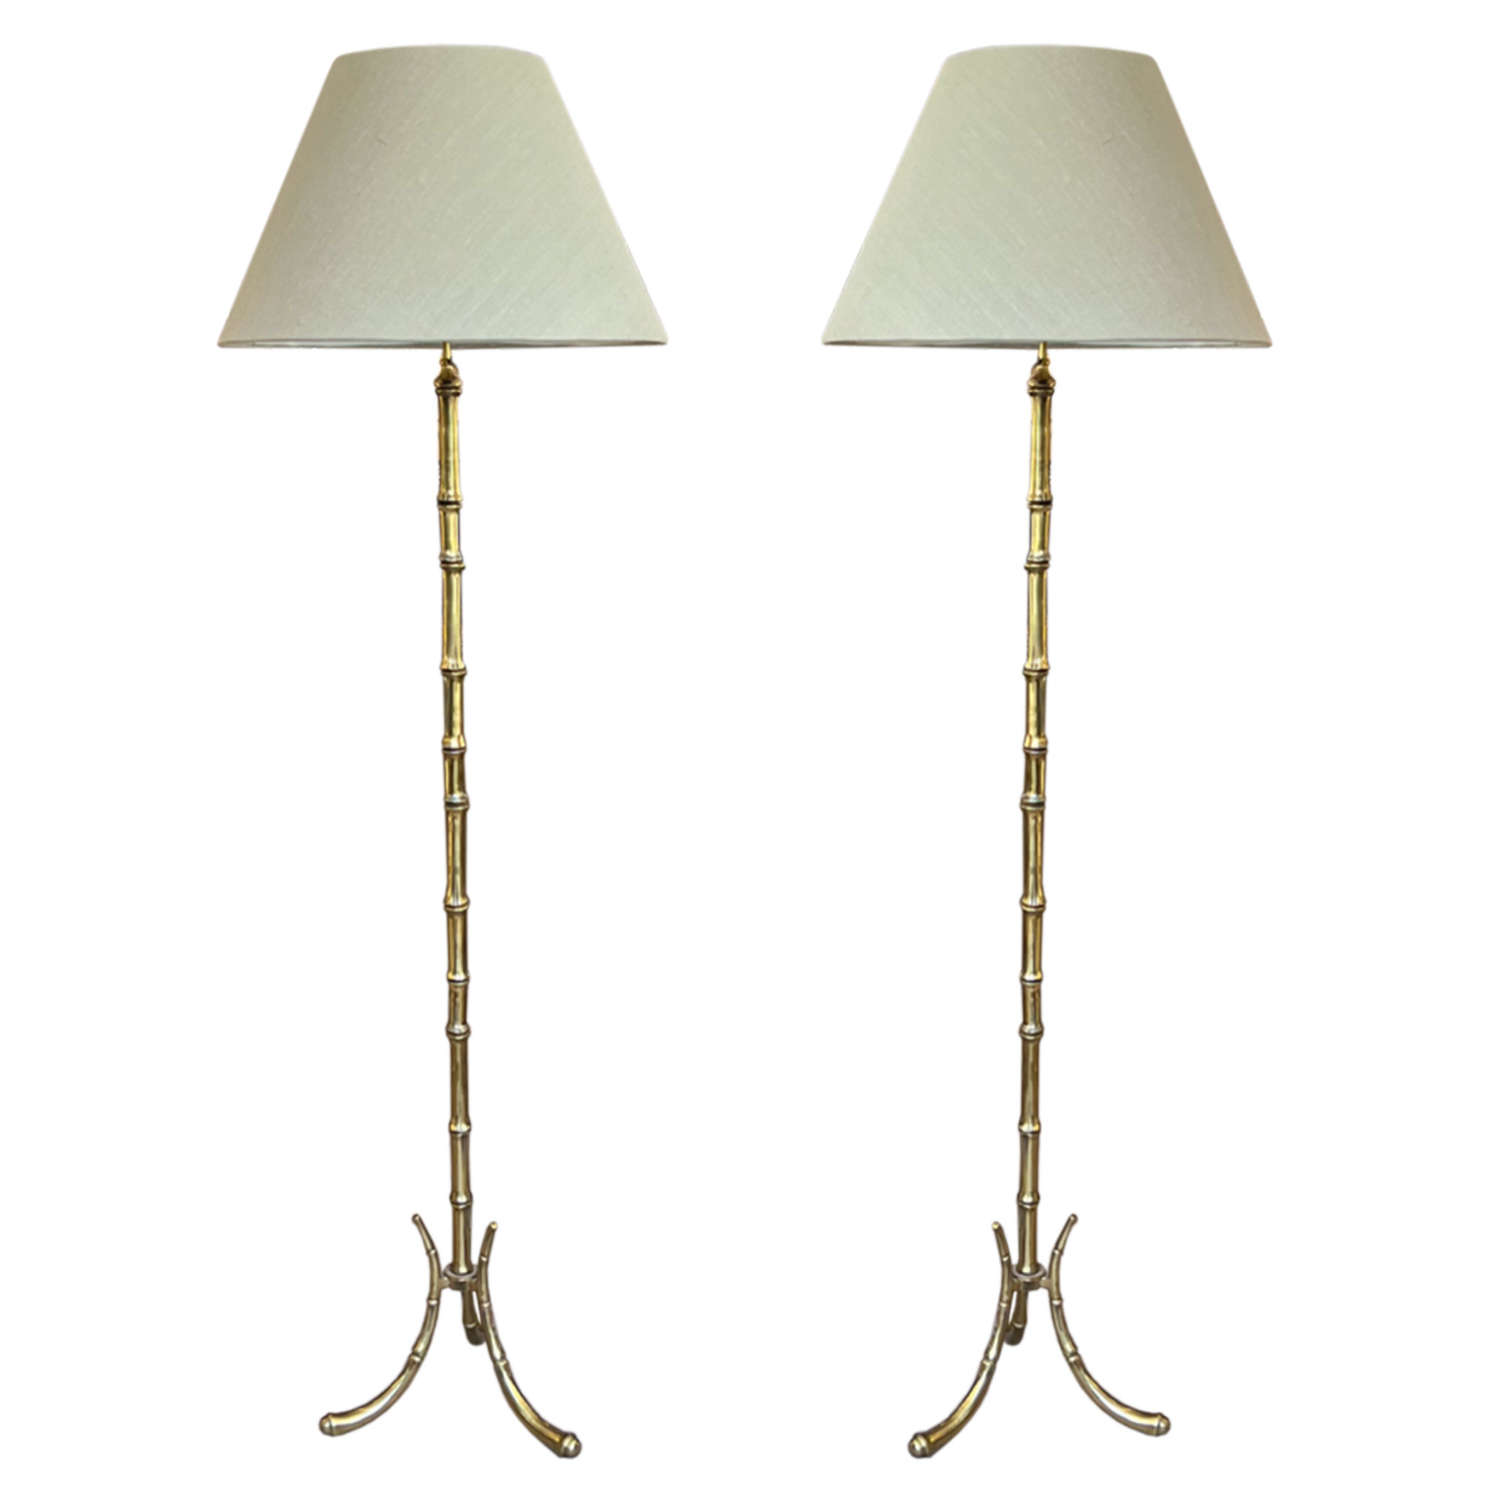 A Near Pair of French 1960s Faux Bamboo Bagués Style Floor Lamps